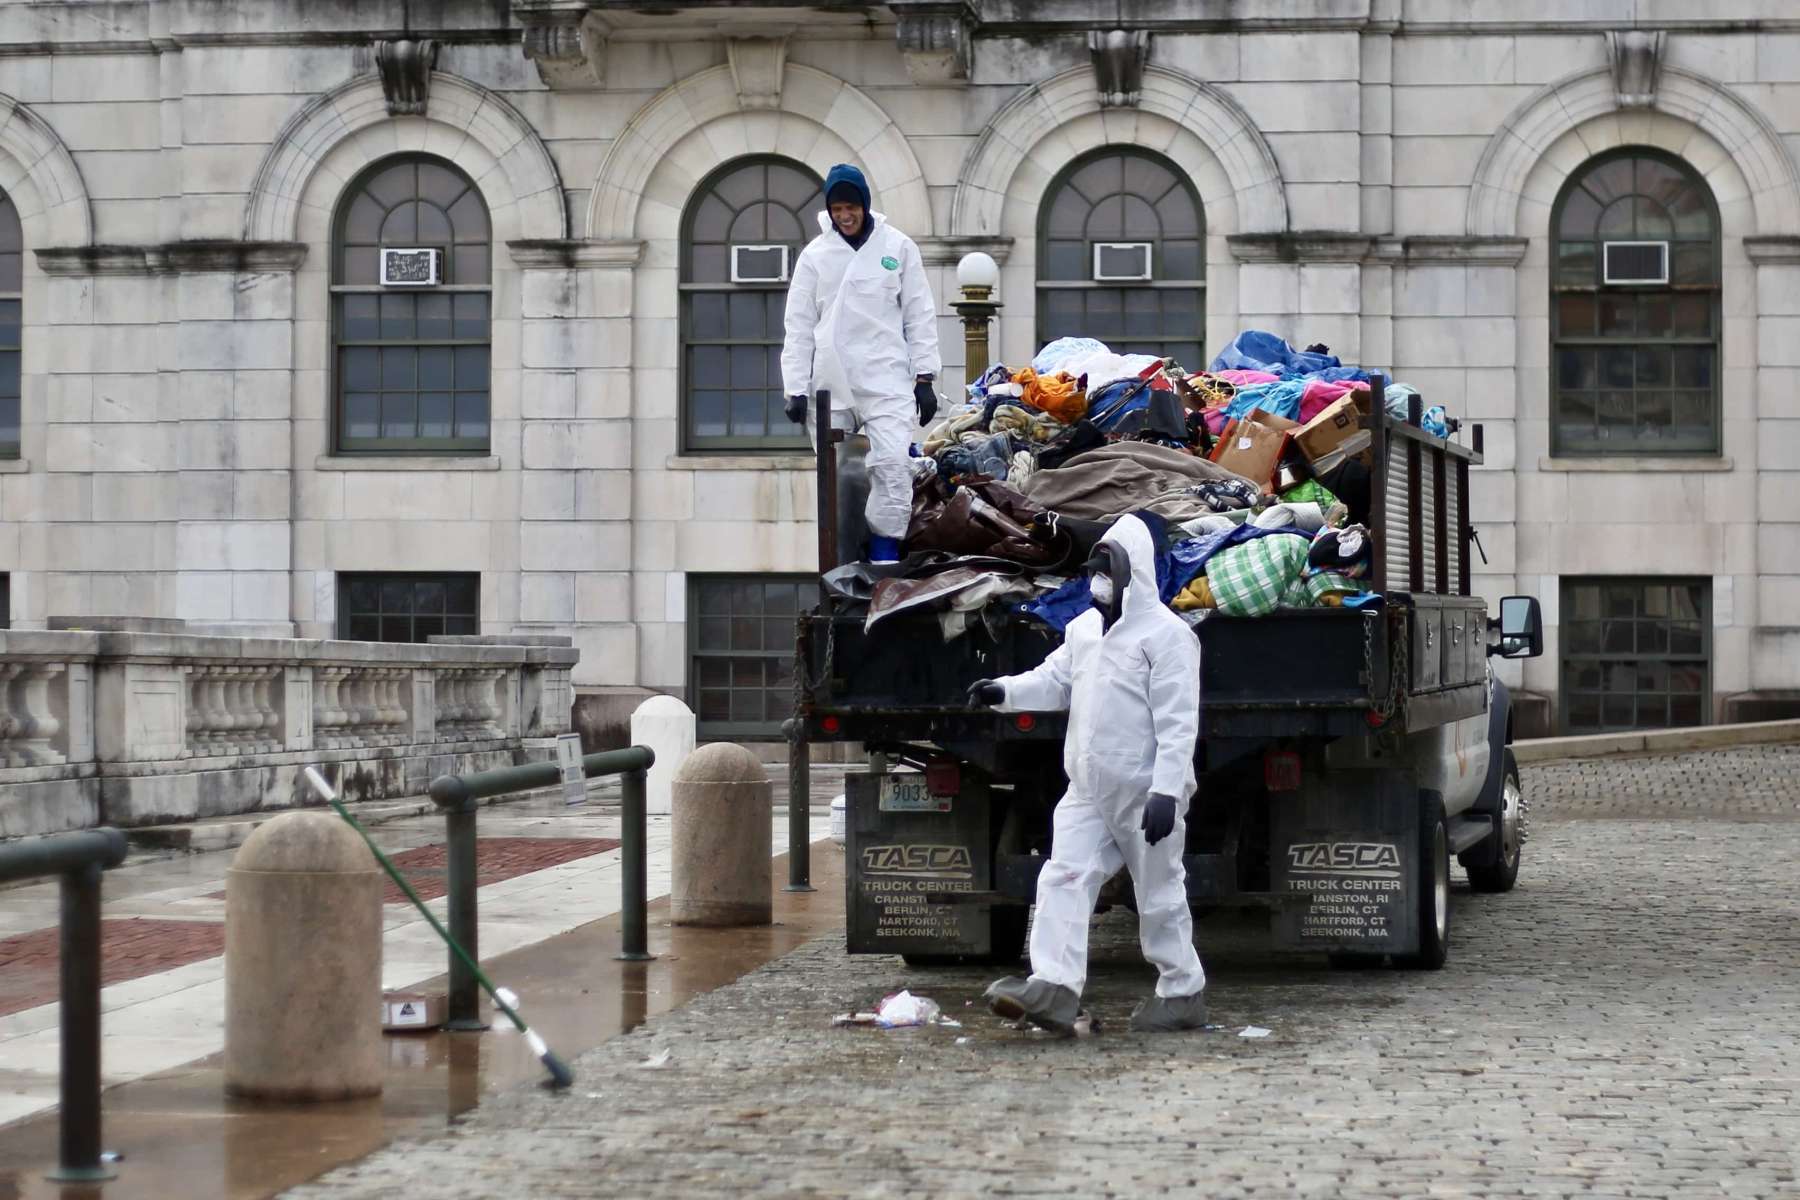 State House plaza homeless encampment cleared by Governor McKee